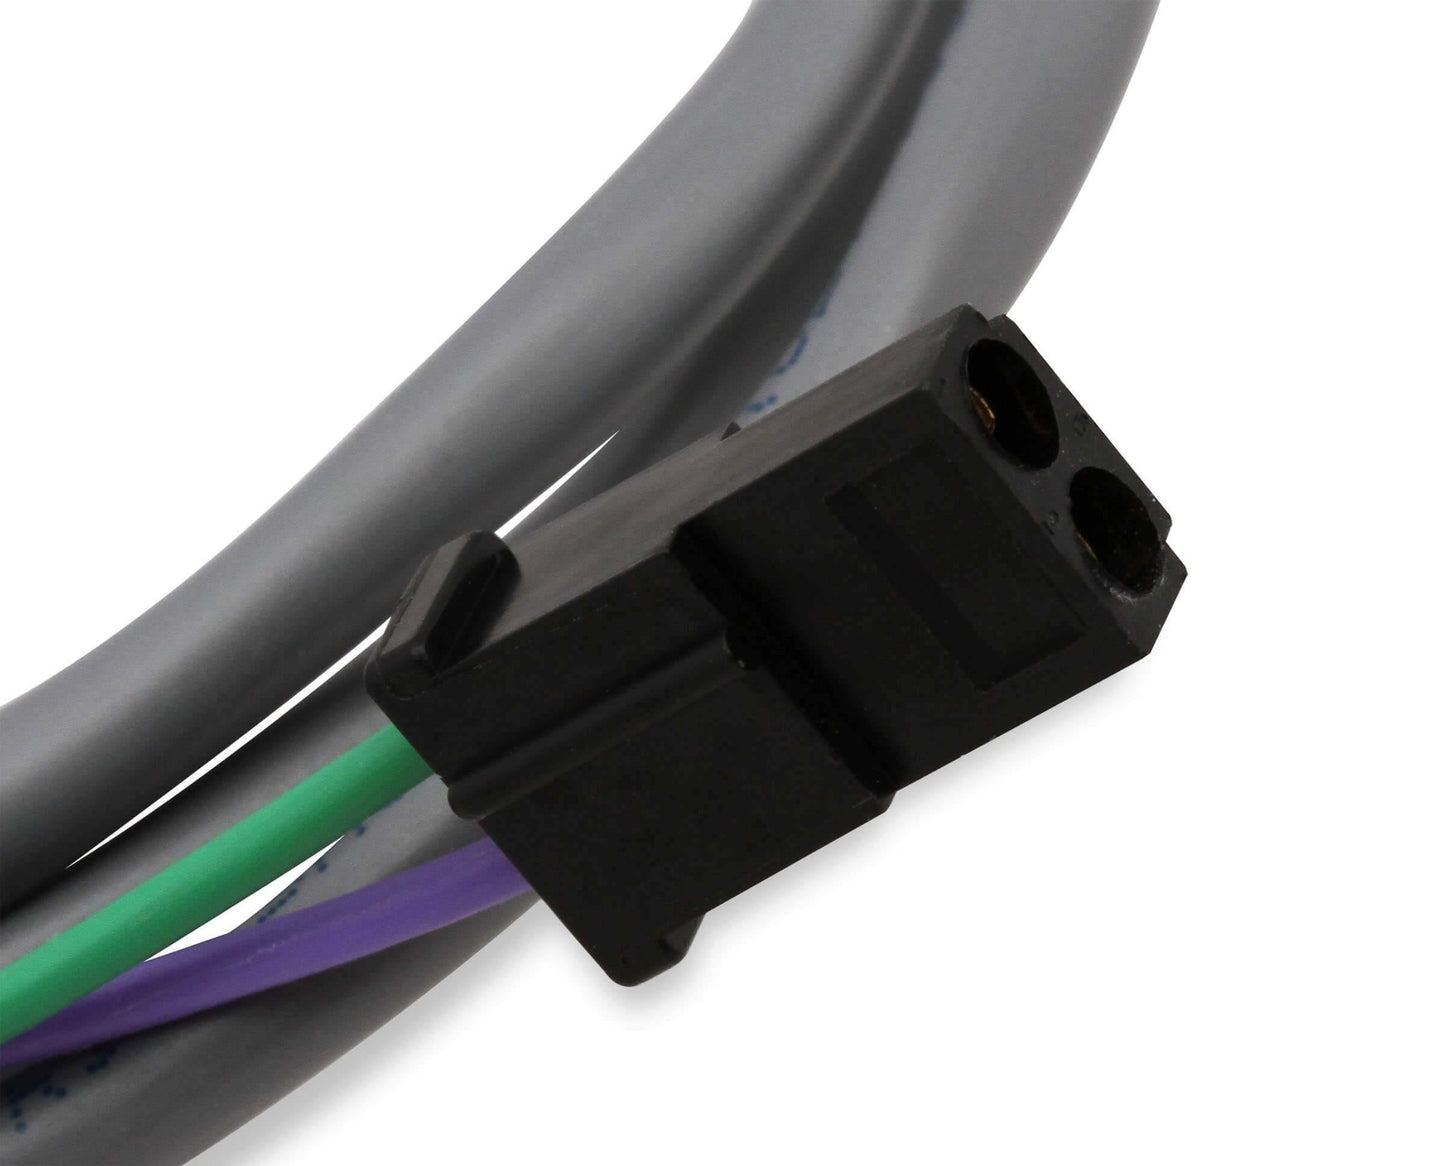 Replacement Shielded Mag Cable for 7730 - 8894